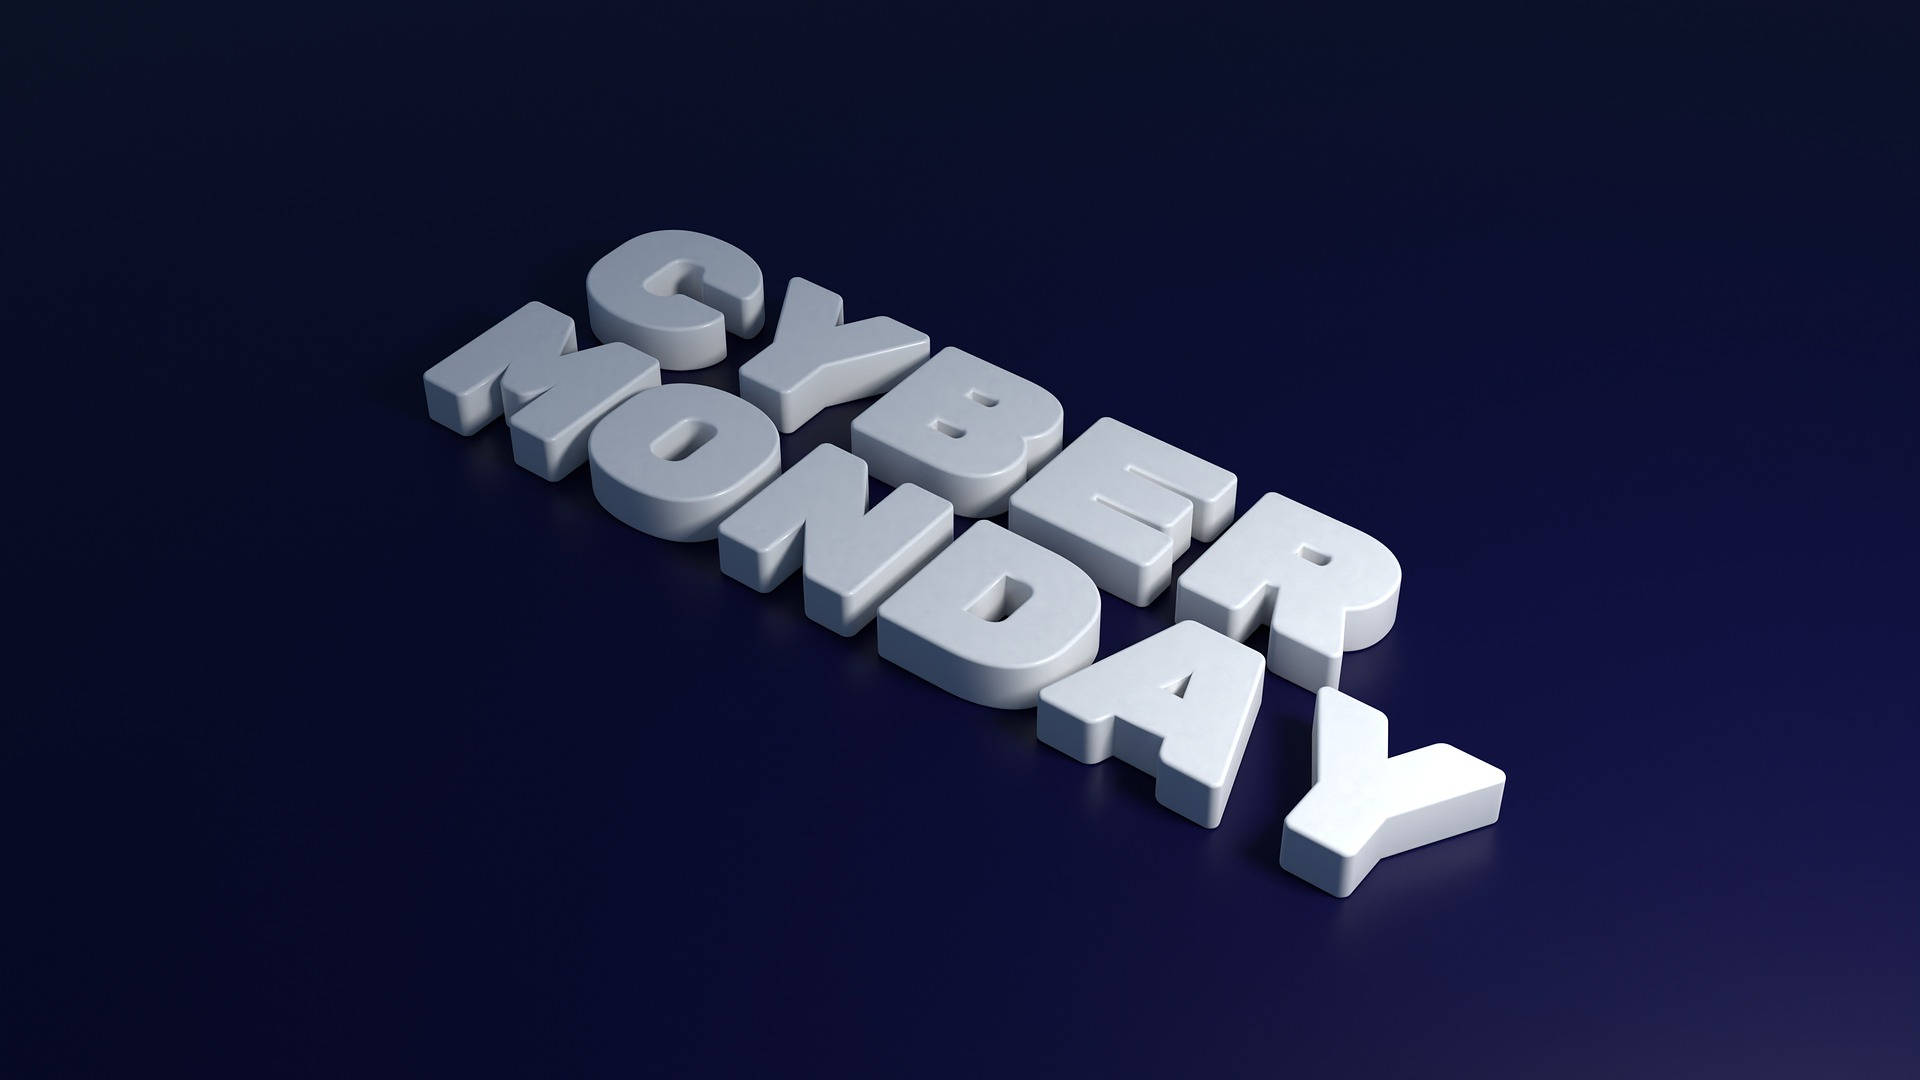 Cyber Monday Business Concept Picture